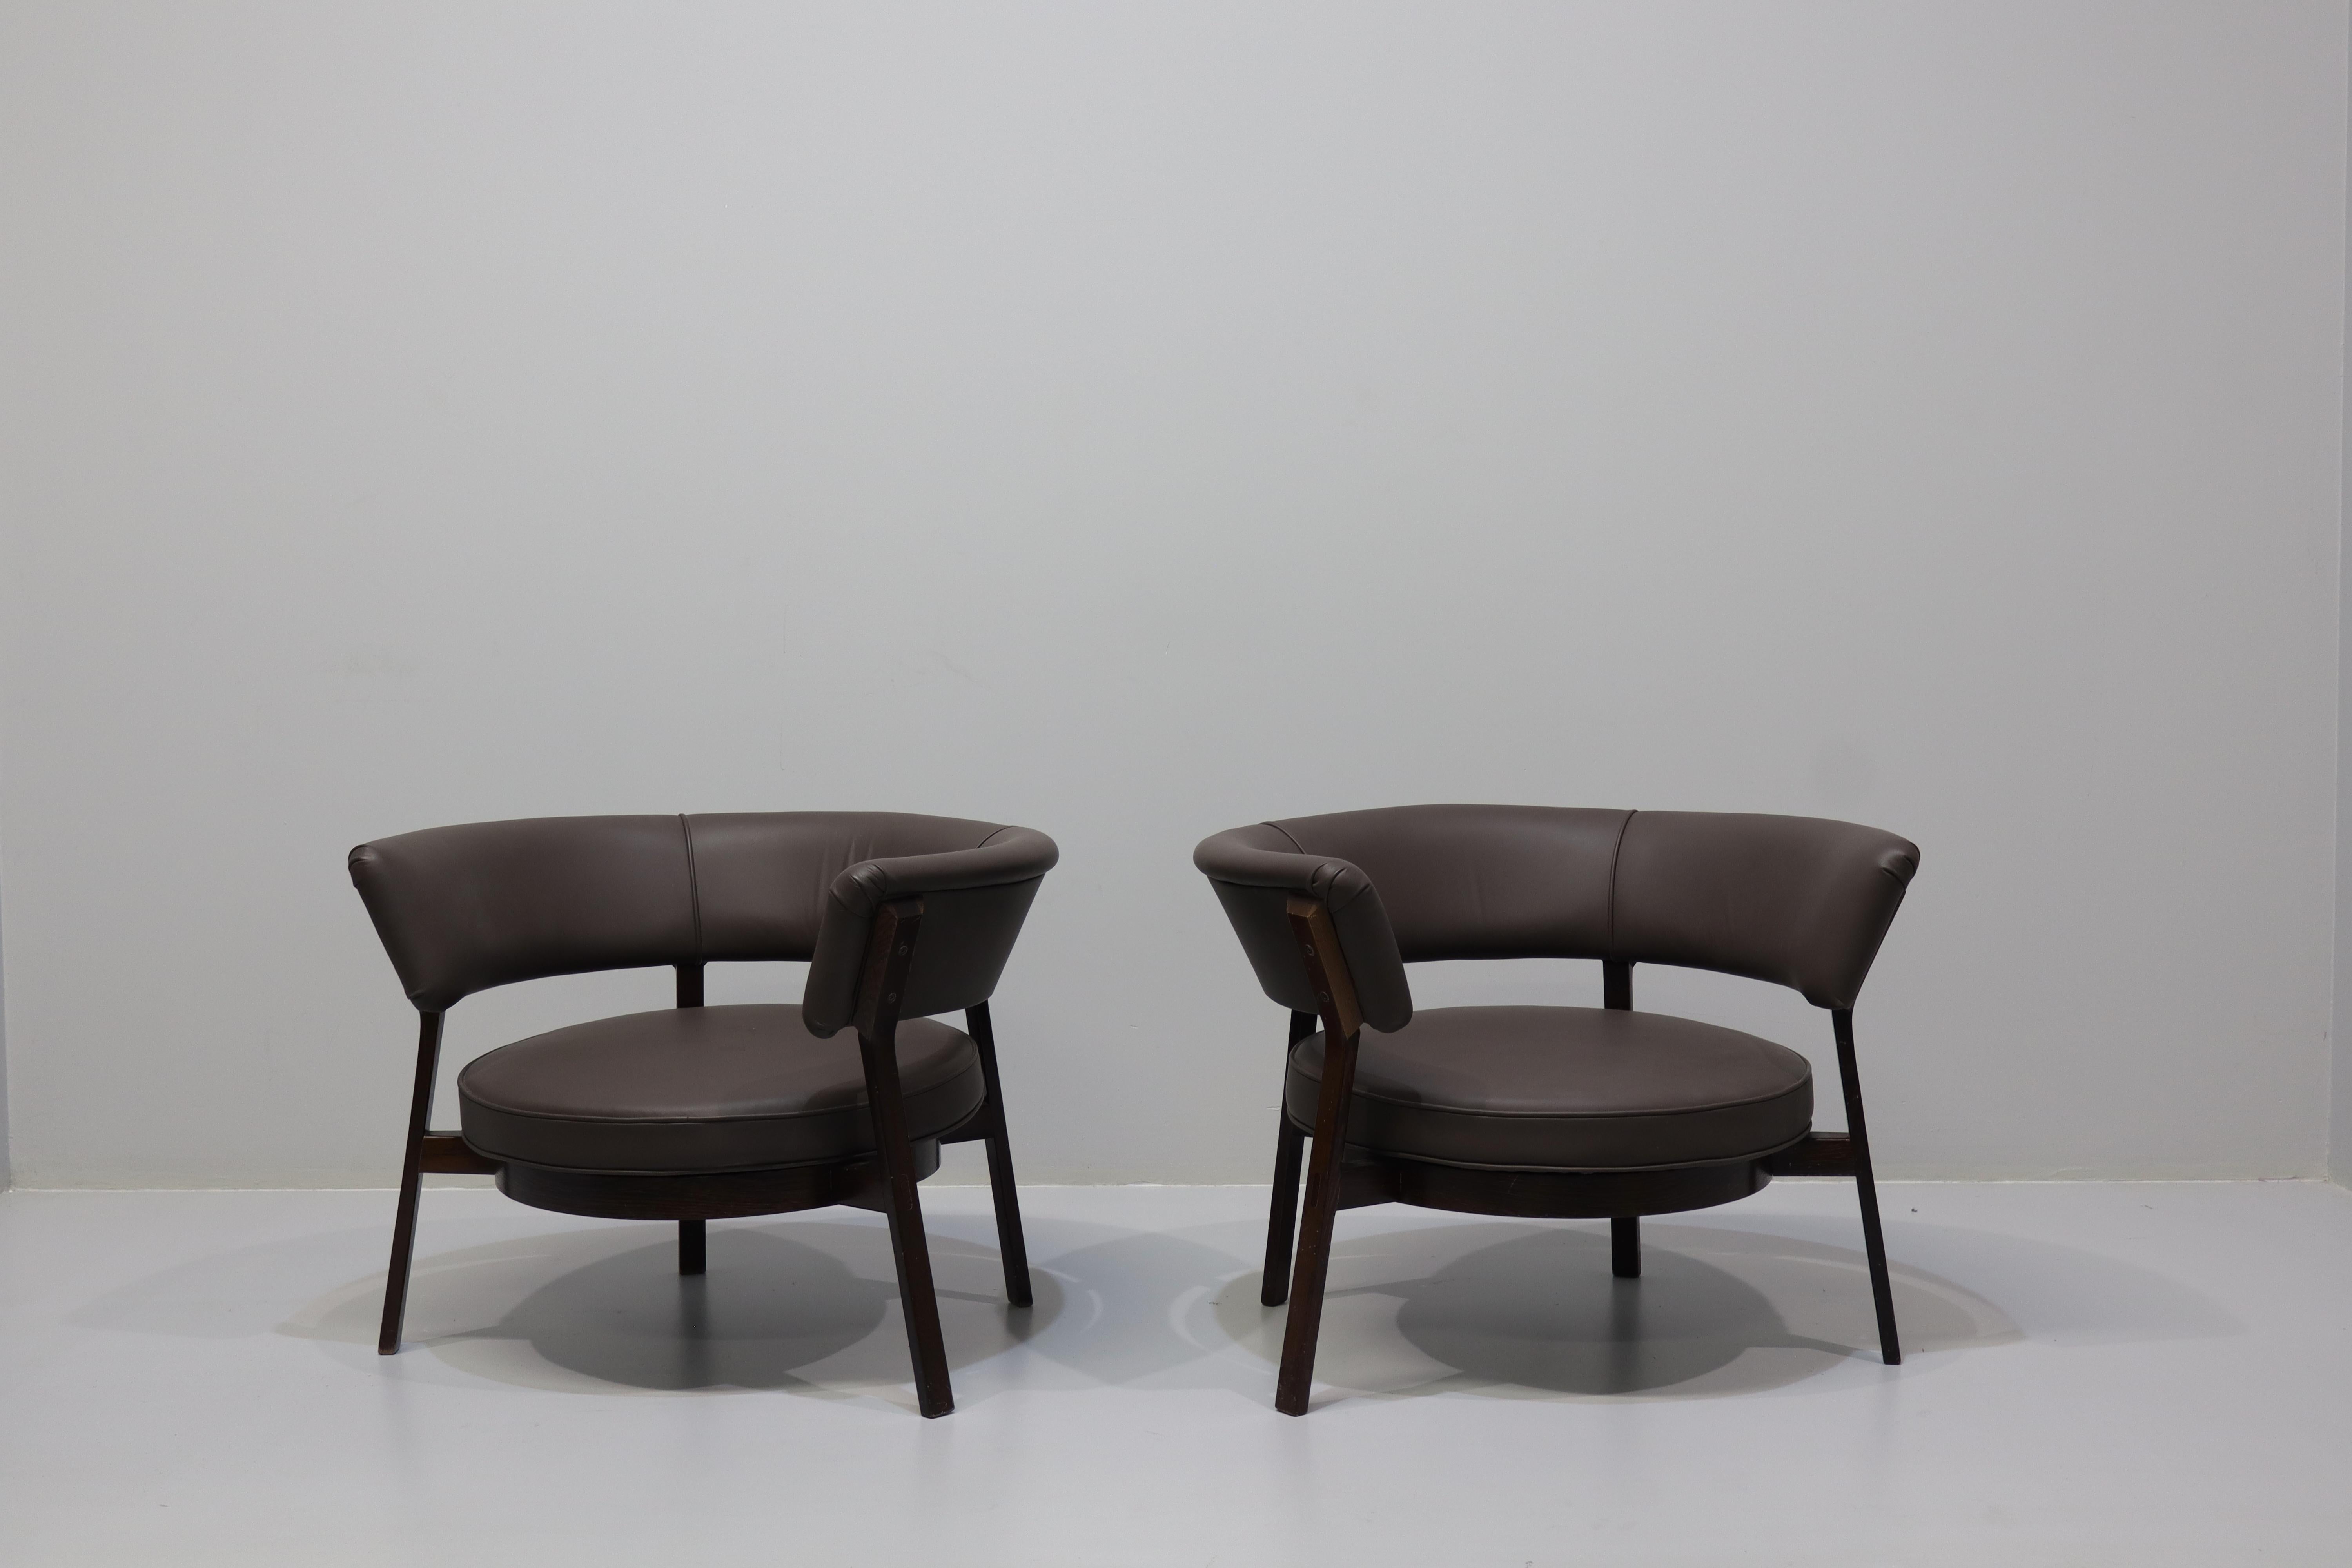 Eugenio Gerli for Tecno, pair of armchairs, model 'P28', wenge, leather, Italy, 1958